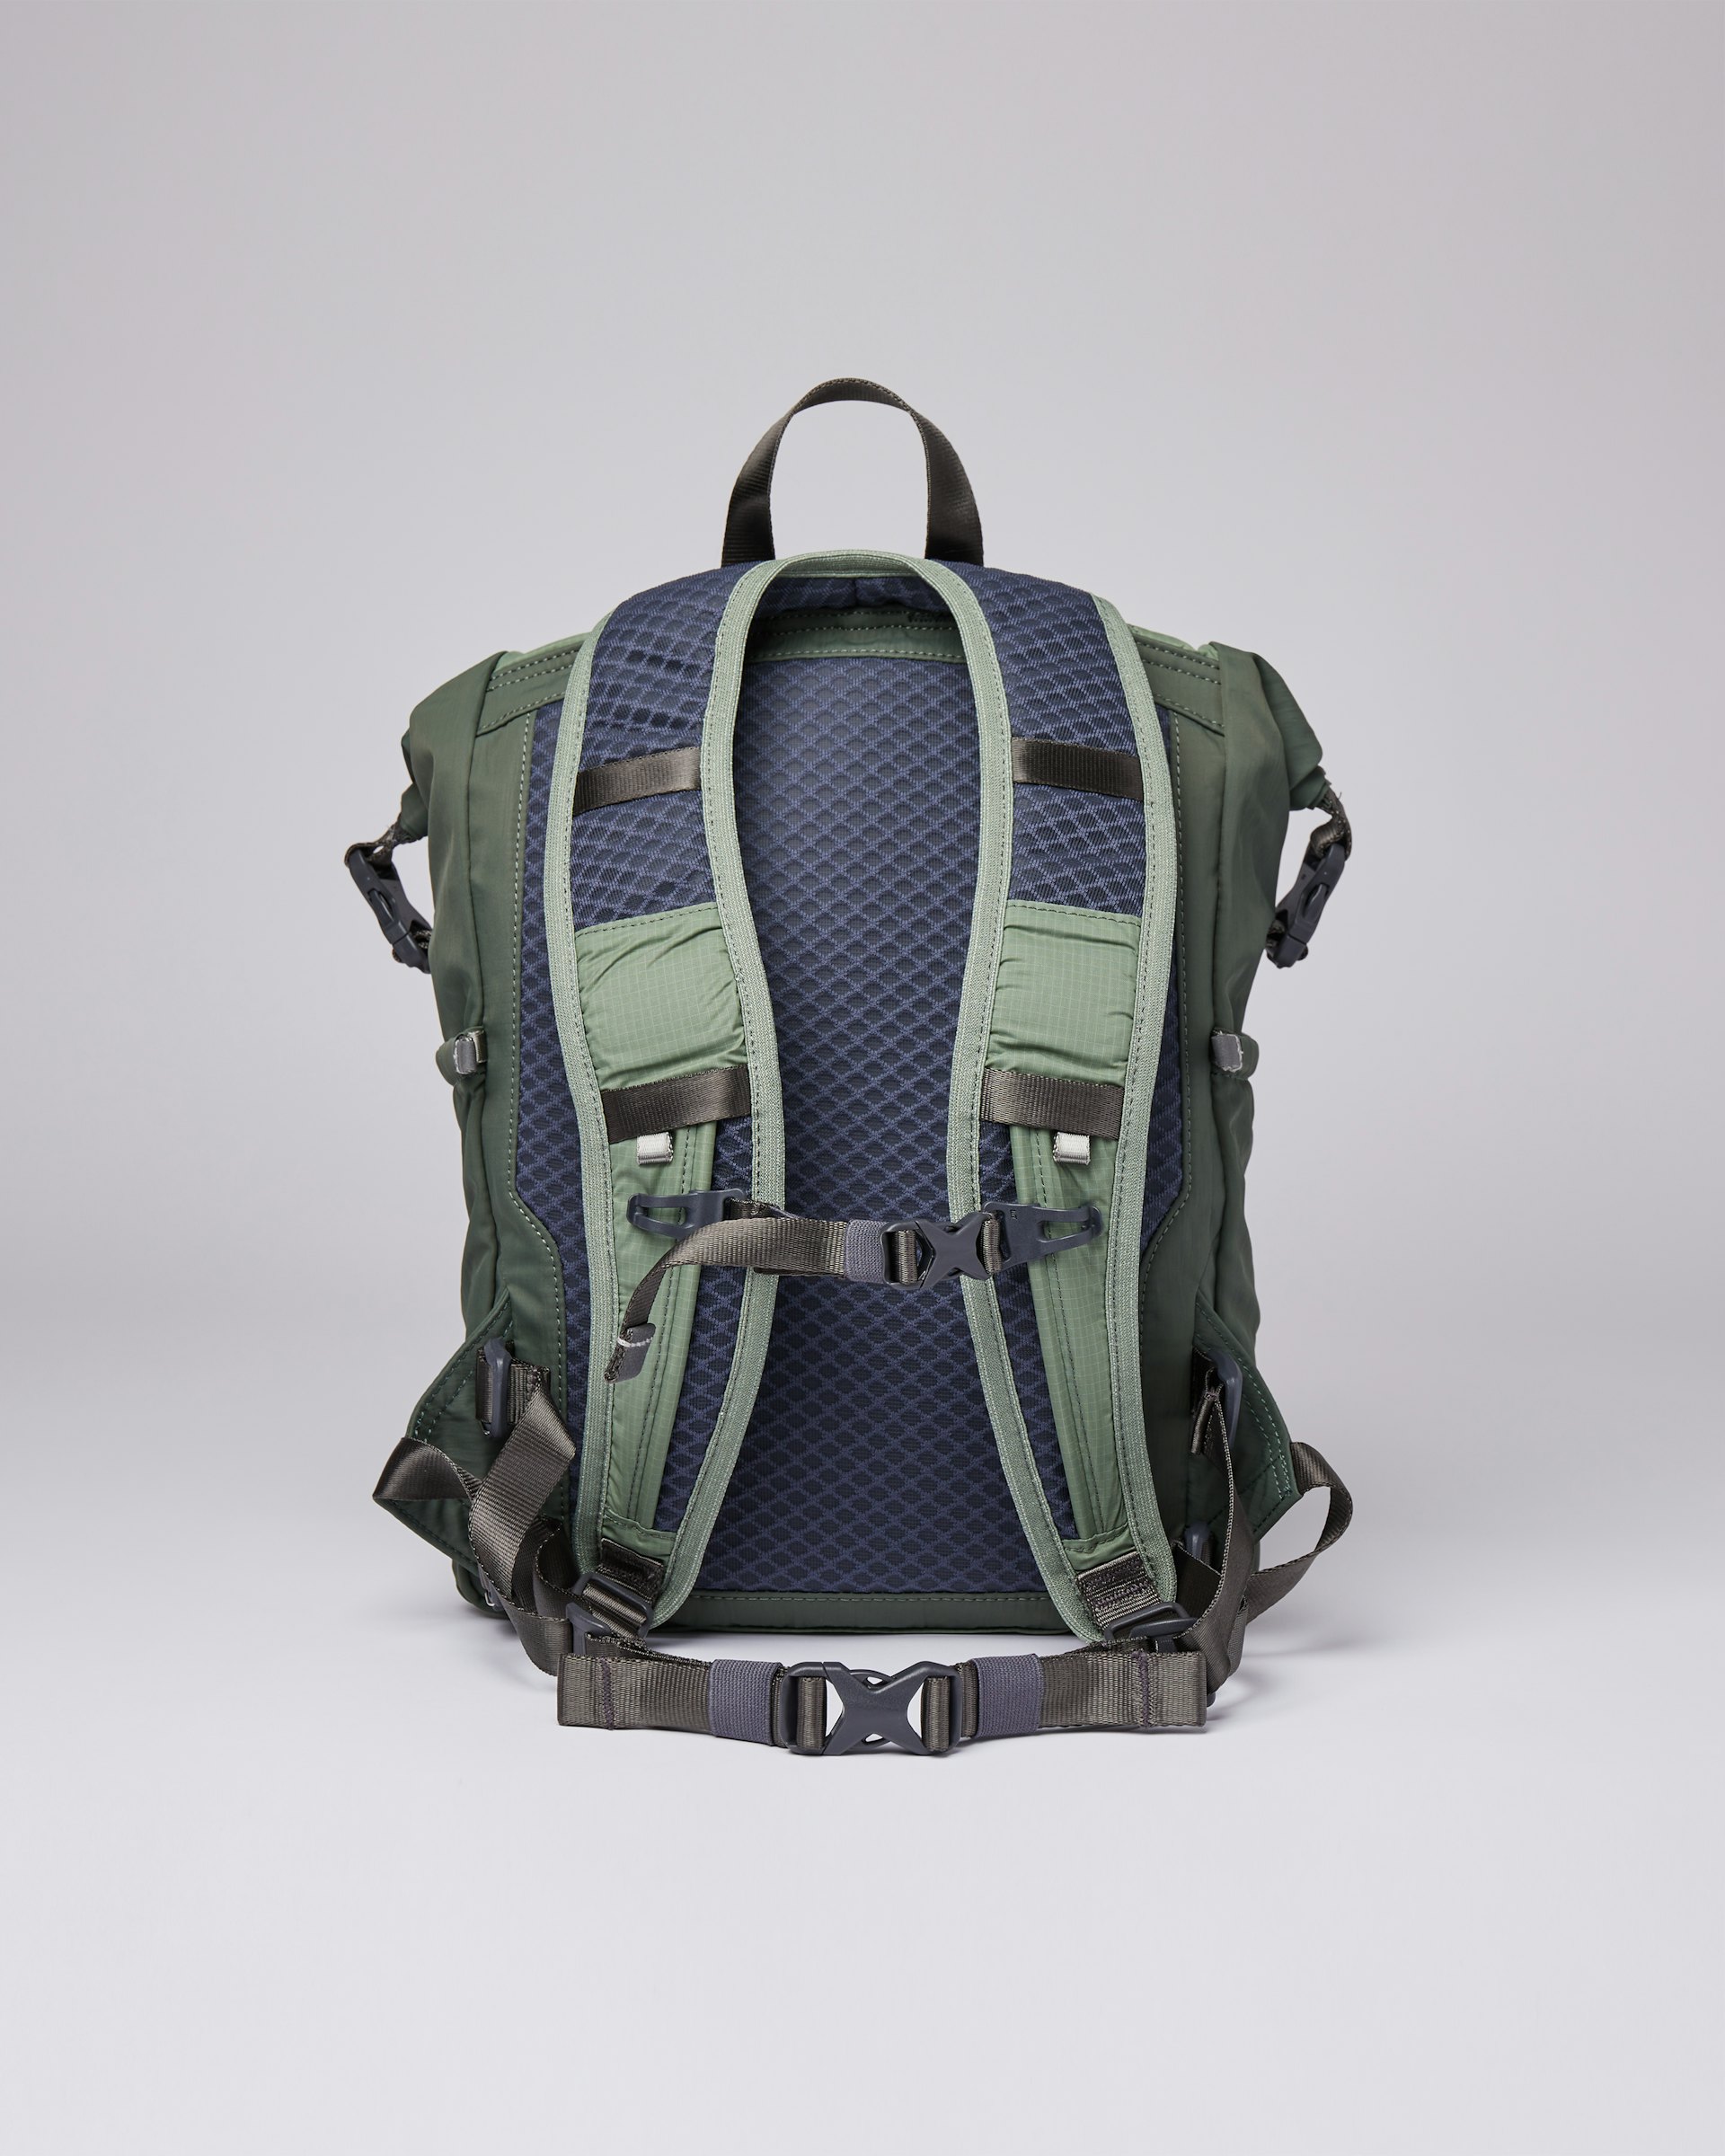 Noa belongs to the category Backpacks and is in color lichen green (3 of 7)